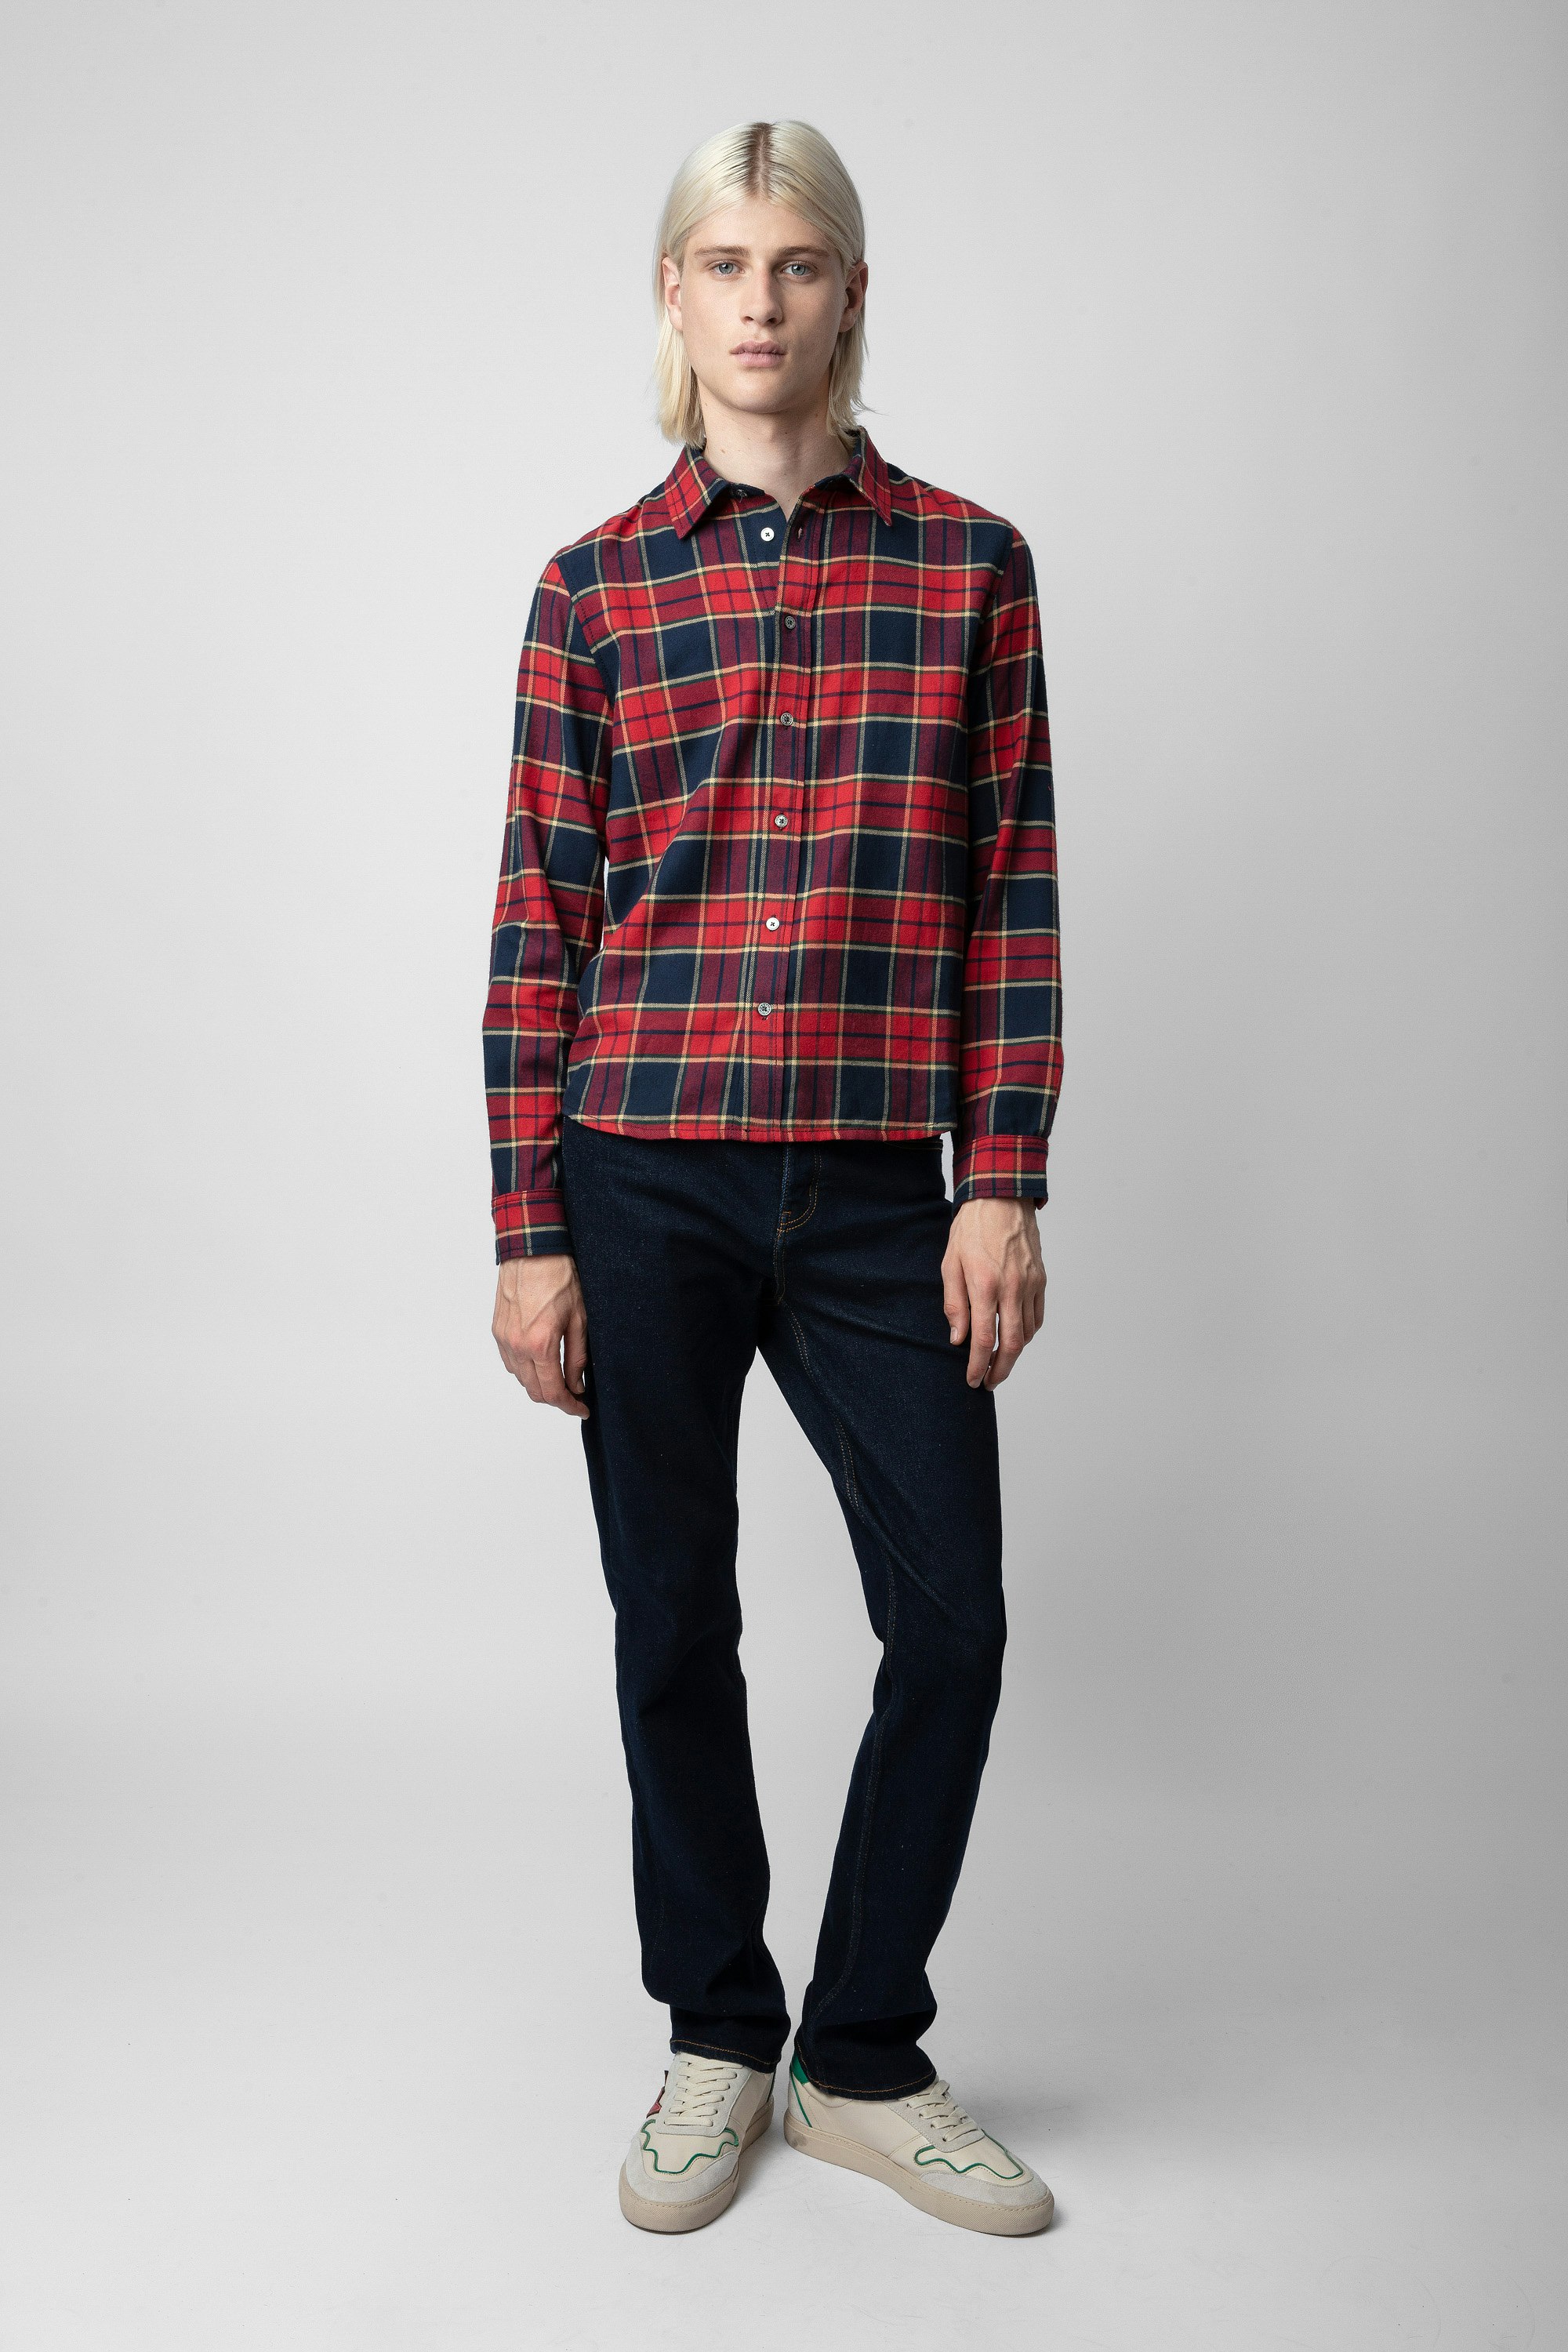 Stan Shirt - Men’s checked red cotton shirt with a Skull motif on the back.